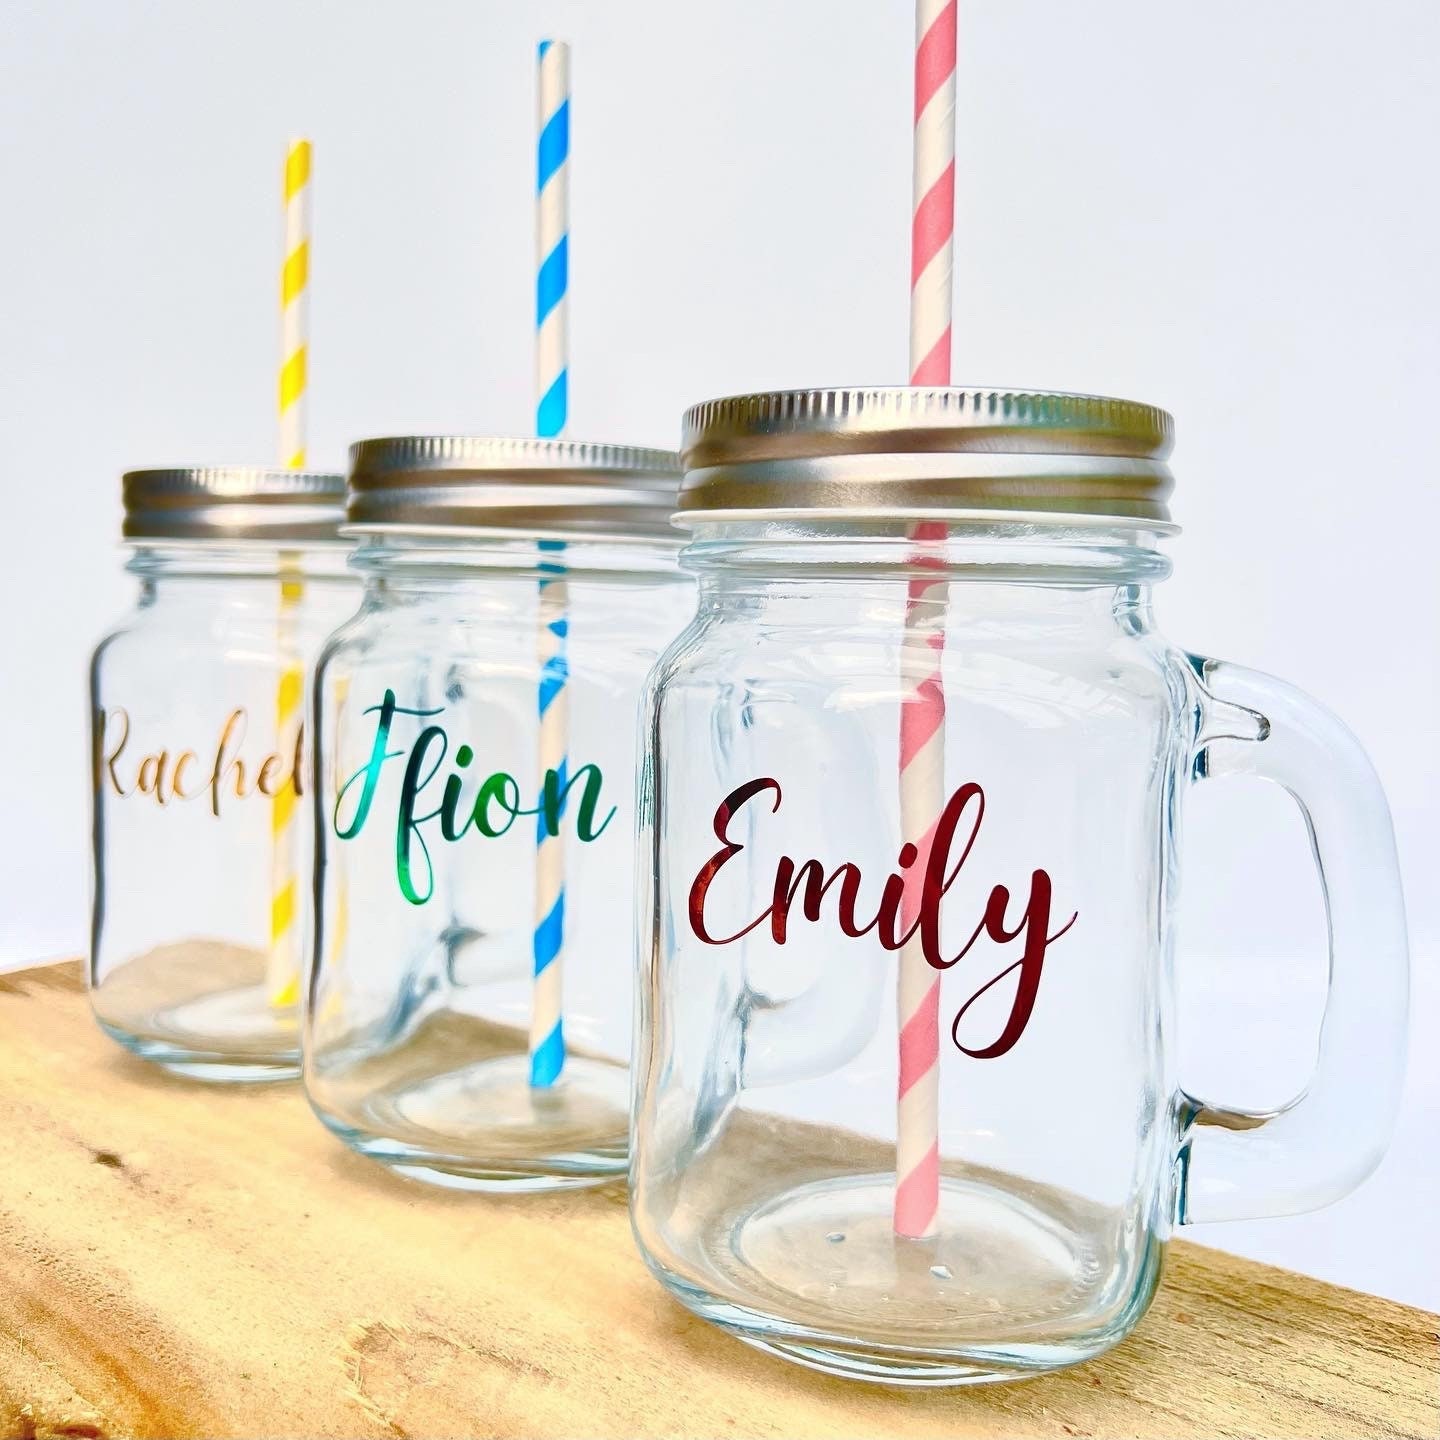 Mason Jar Iced Coffee Cup with Lid and Straw, 24oz Regular Mouth Mason Jars  with Handle Glass Coffee…See more Mason Jar Iced Coffee Cup with Lid and